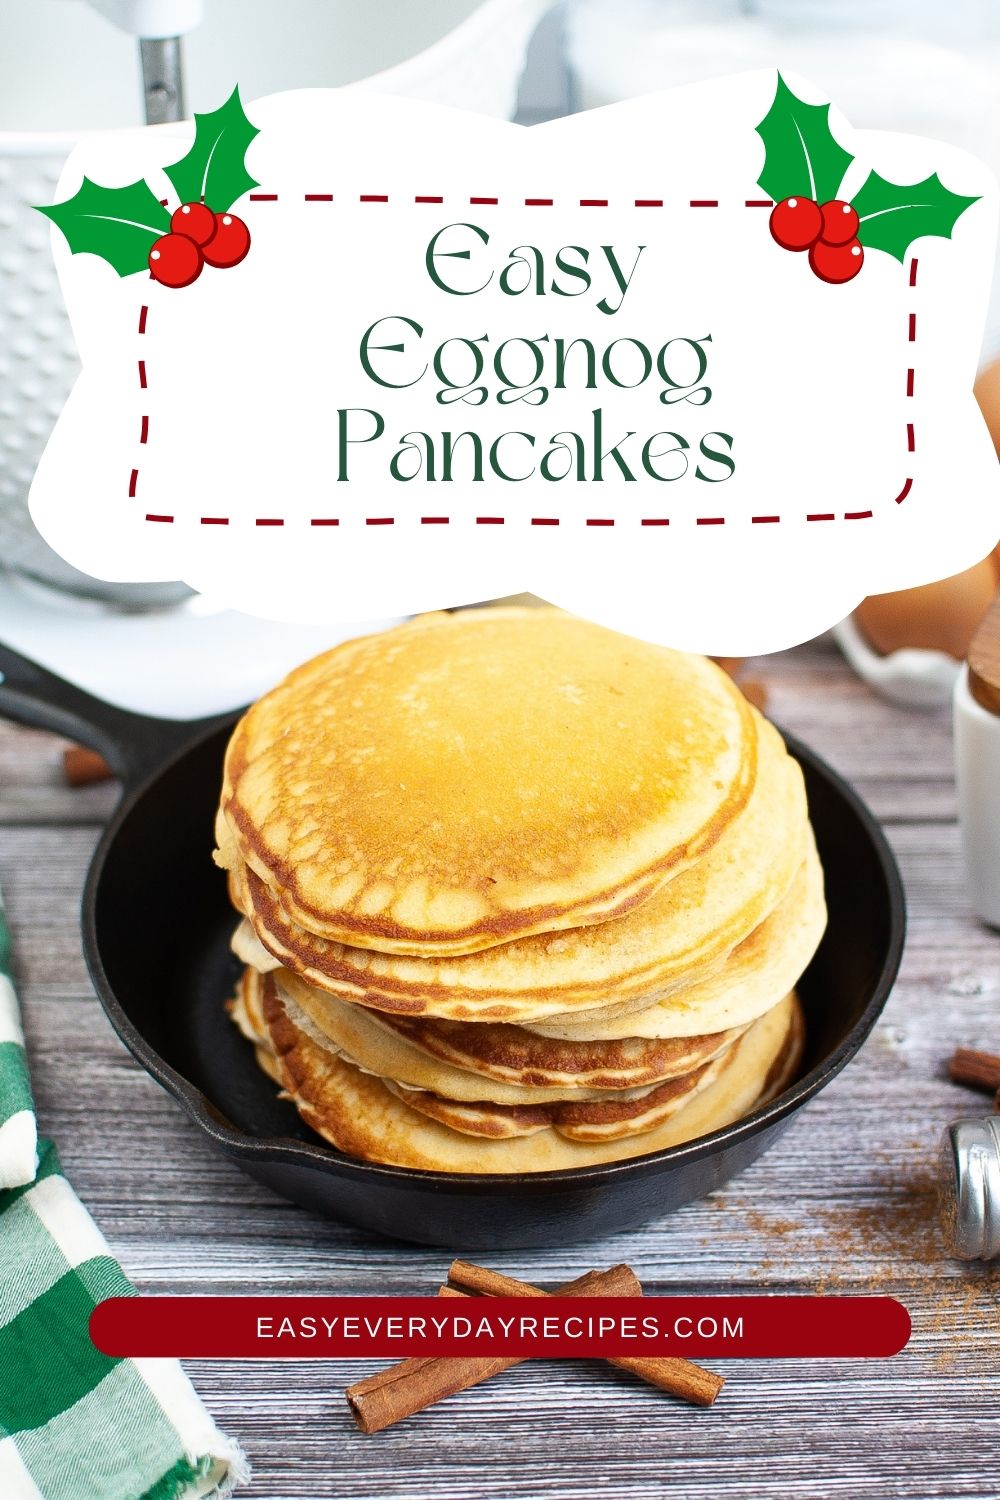 A stack of pancakes with the text easy octopus pancakes.